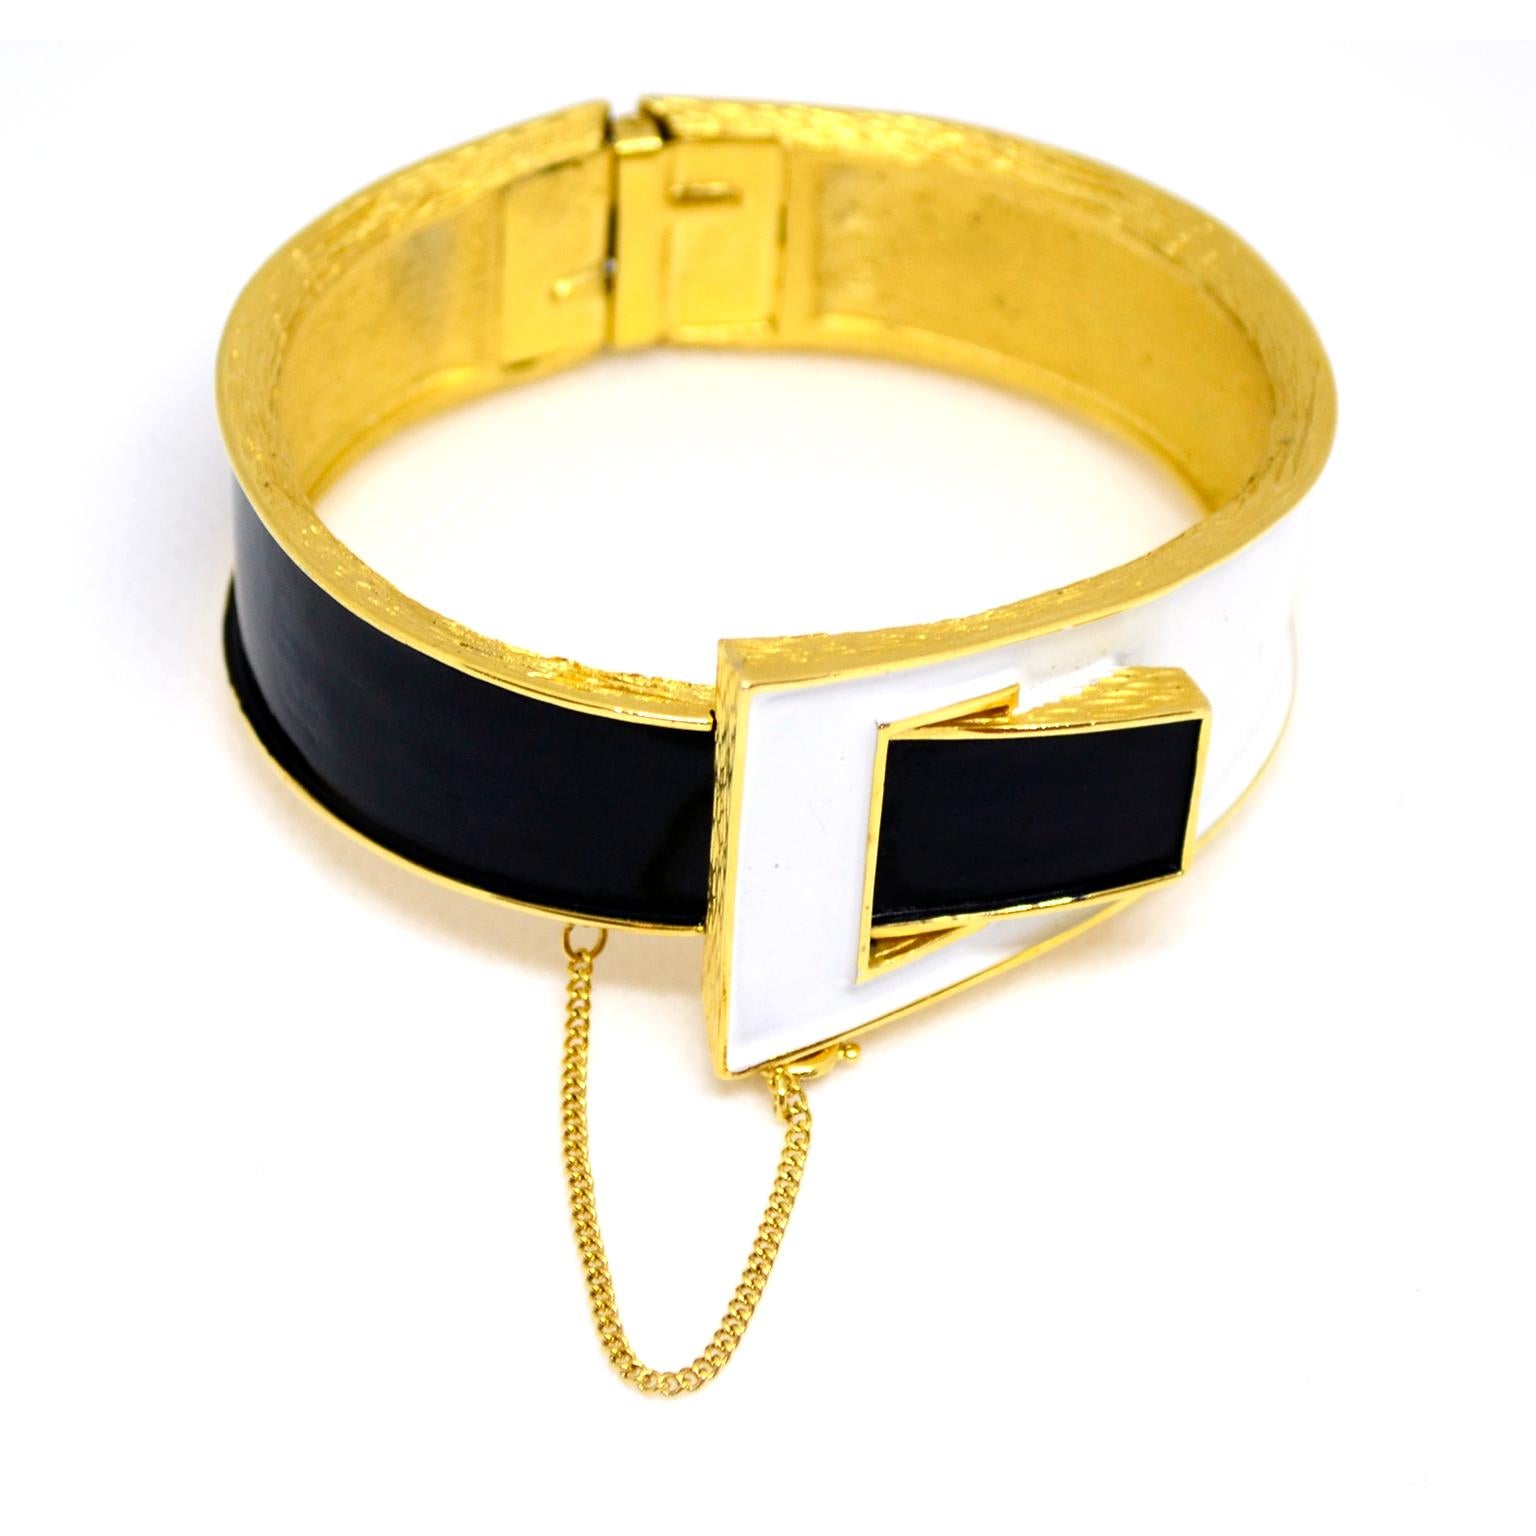 This is a great vintage Trifari clamper bracelet with white and black enamel on gold tone metal. The hinged bracelet resembles a buckle and measures 6.5